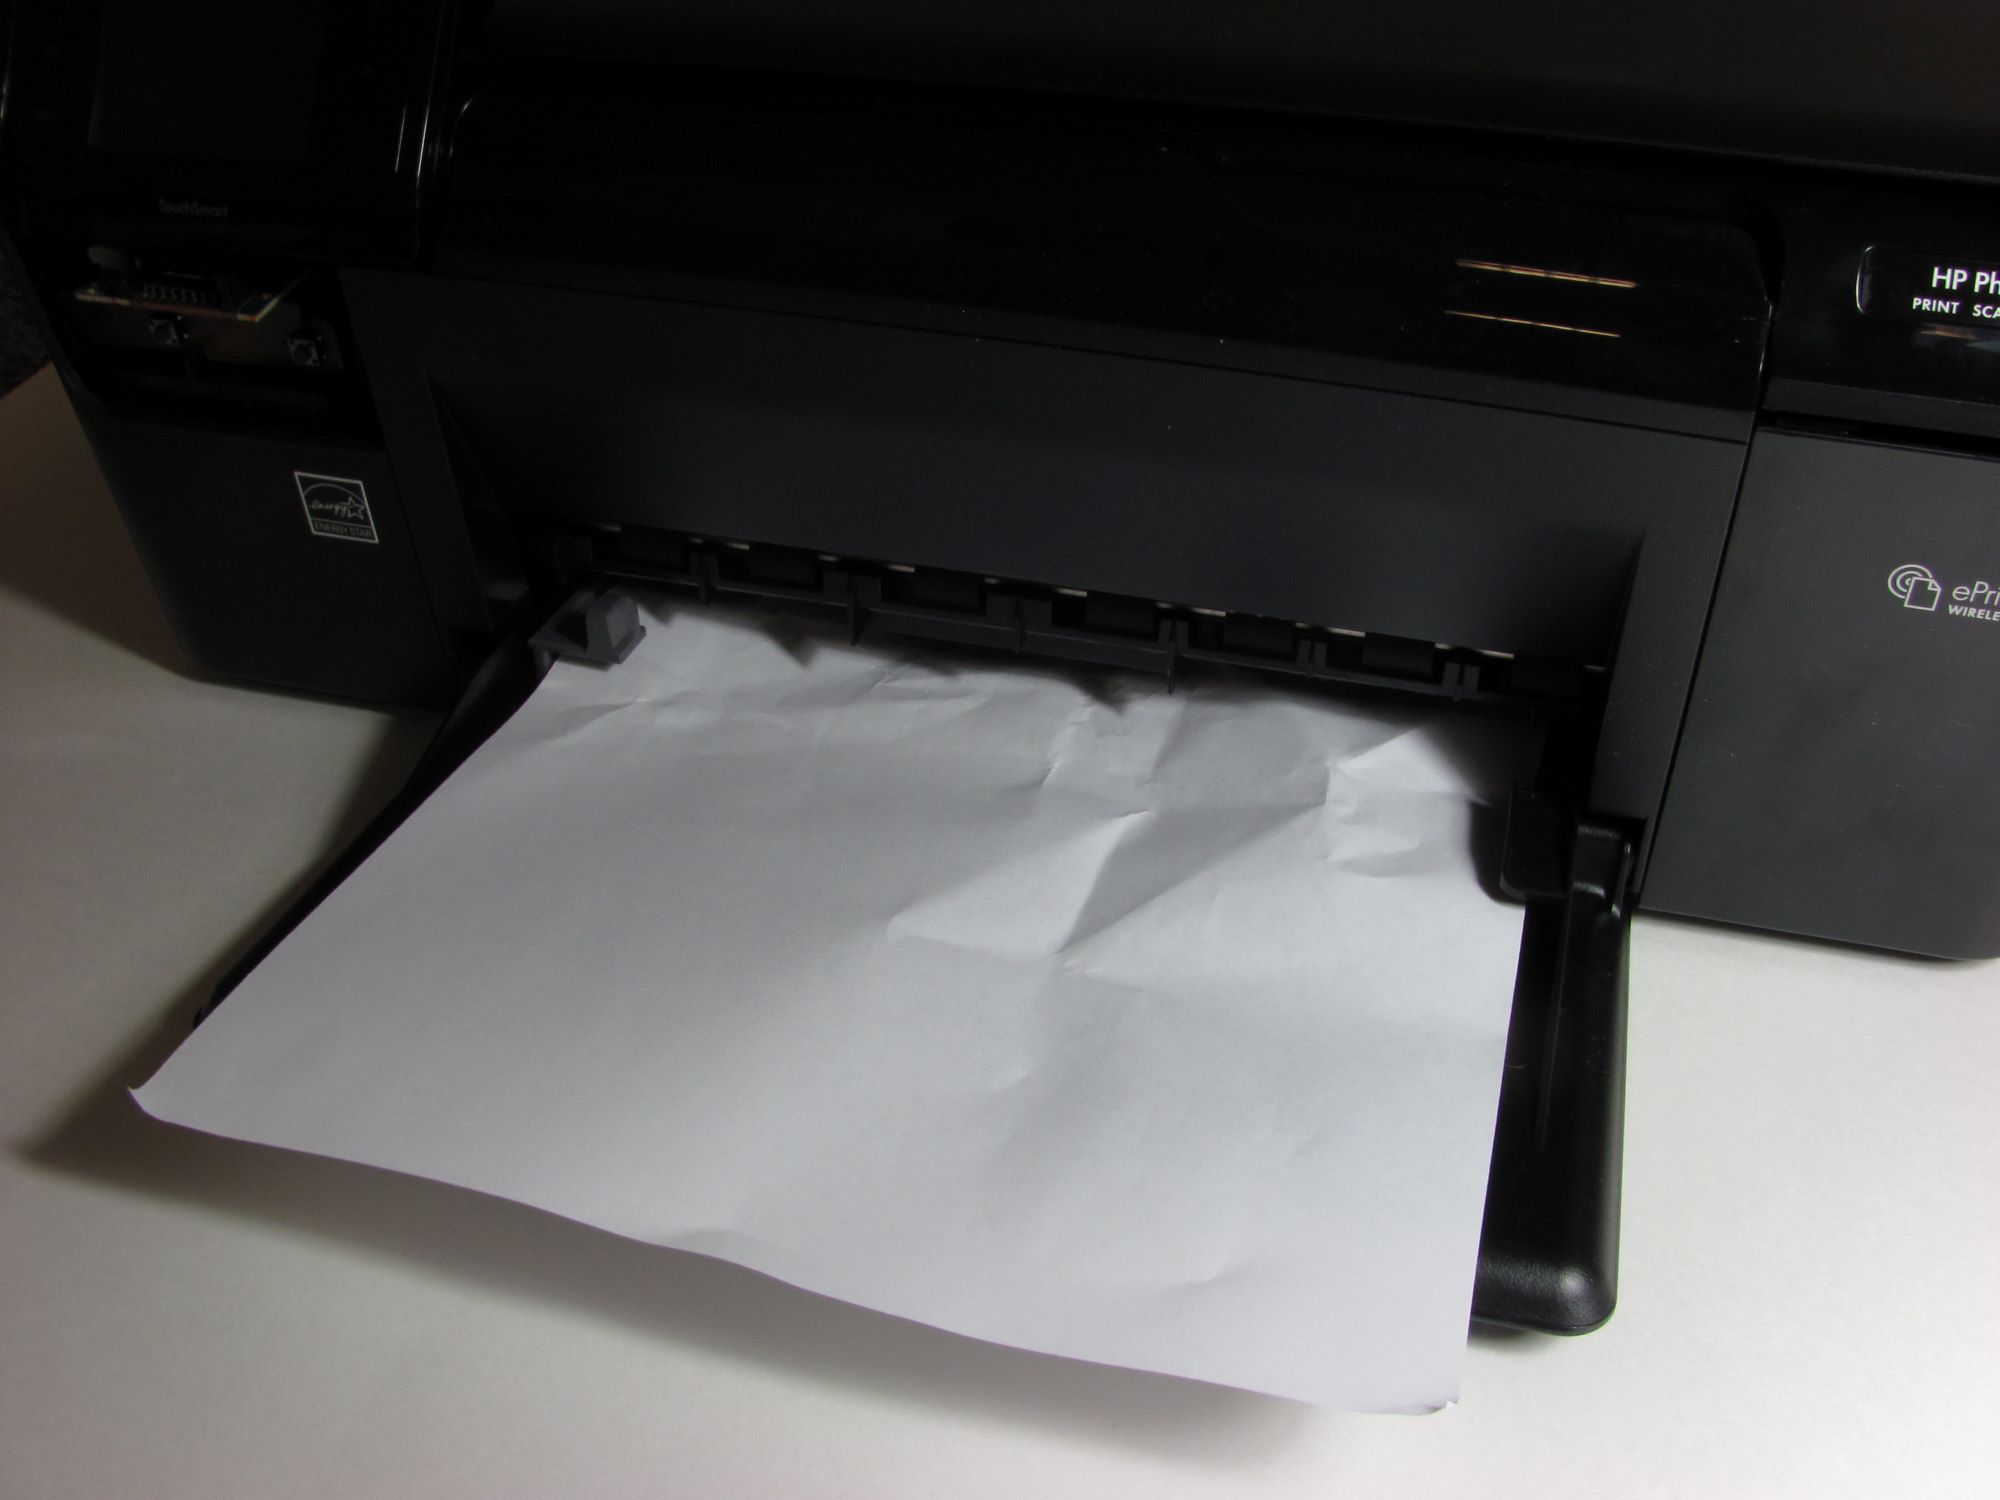 How To Get A Paper Jam Out Of A Printer